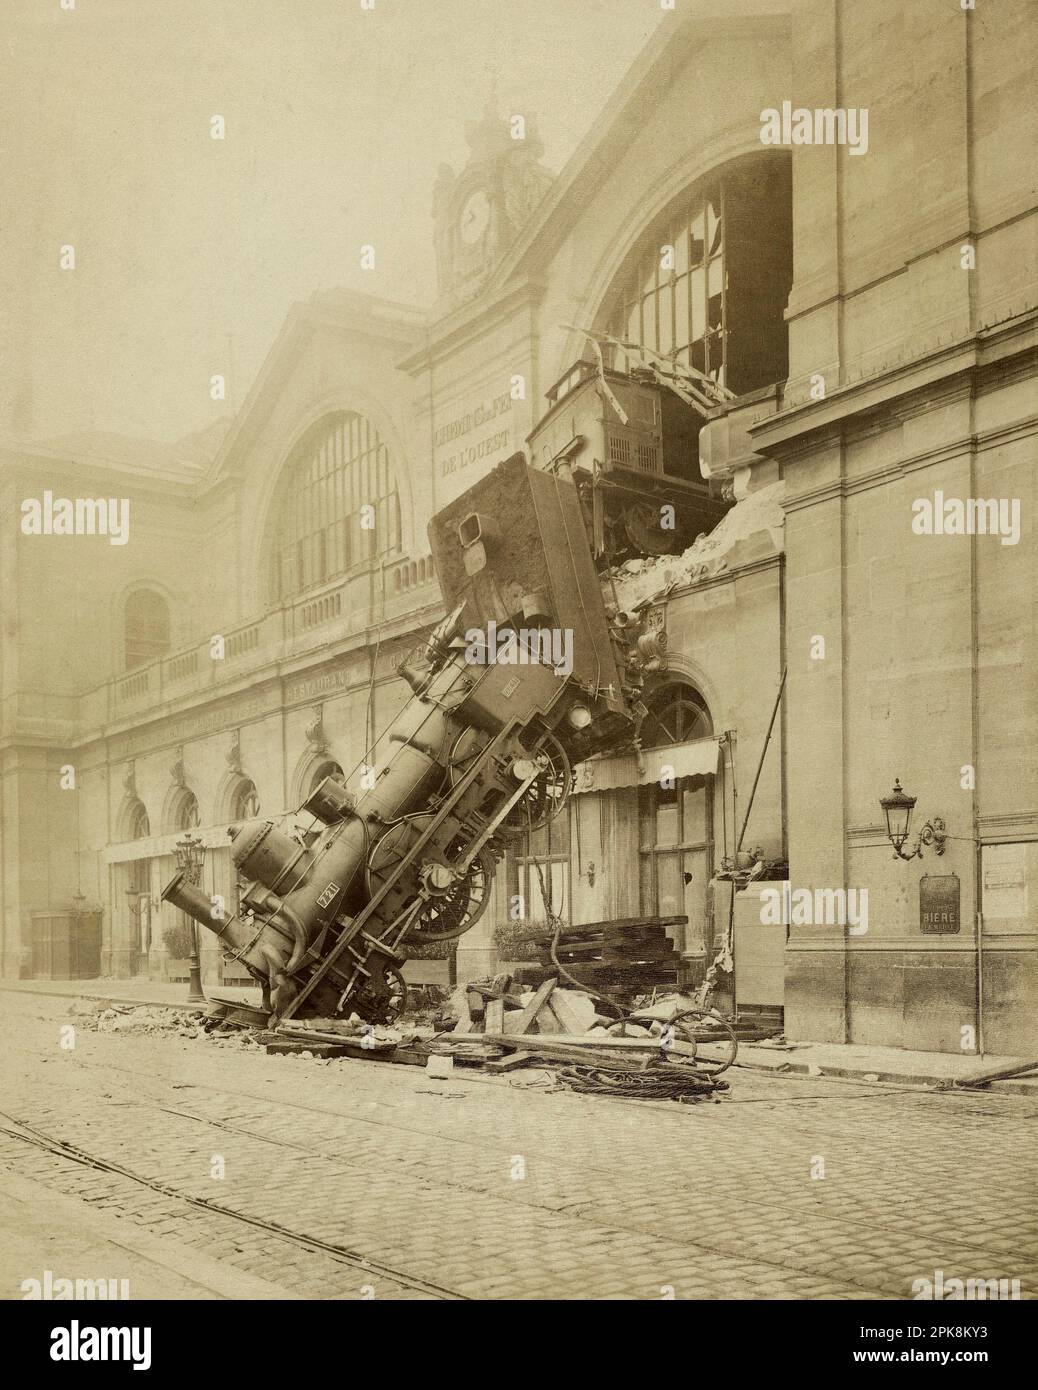 The Montparnasse station accident 1895 Paris ( The Granville Express locomotive fell vertically on the station square on October 22, 1895. The woman who died that day was the wife of the newspaper vendor she was helping. Stock Photo